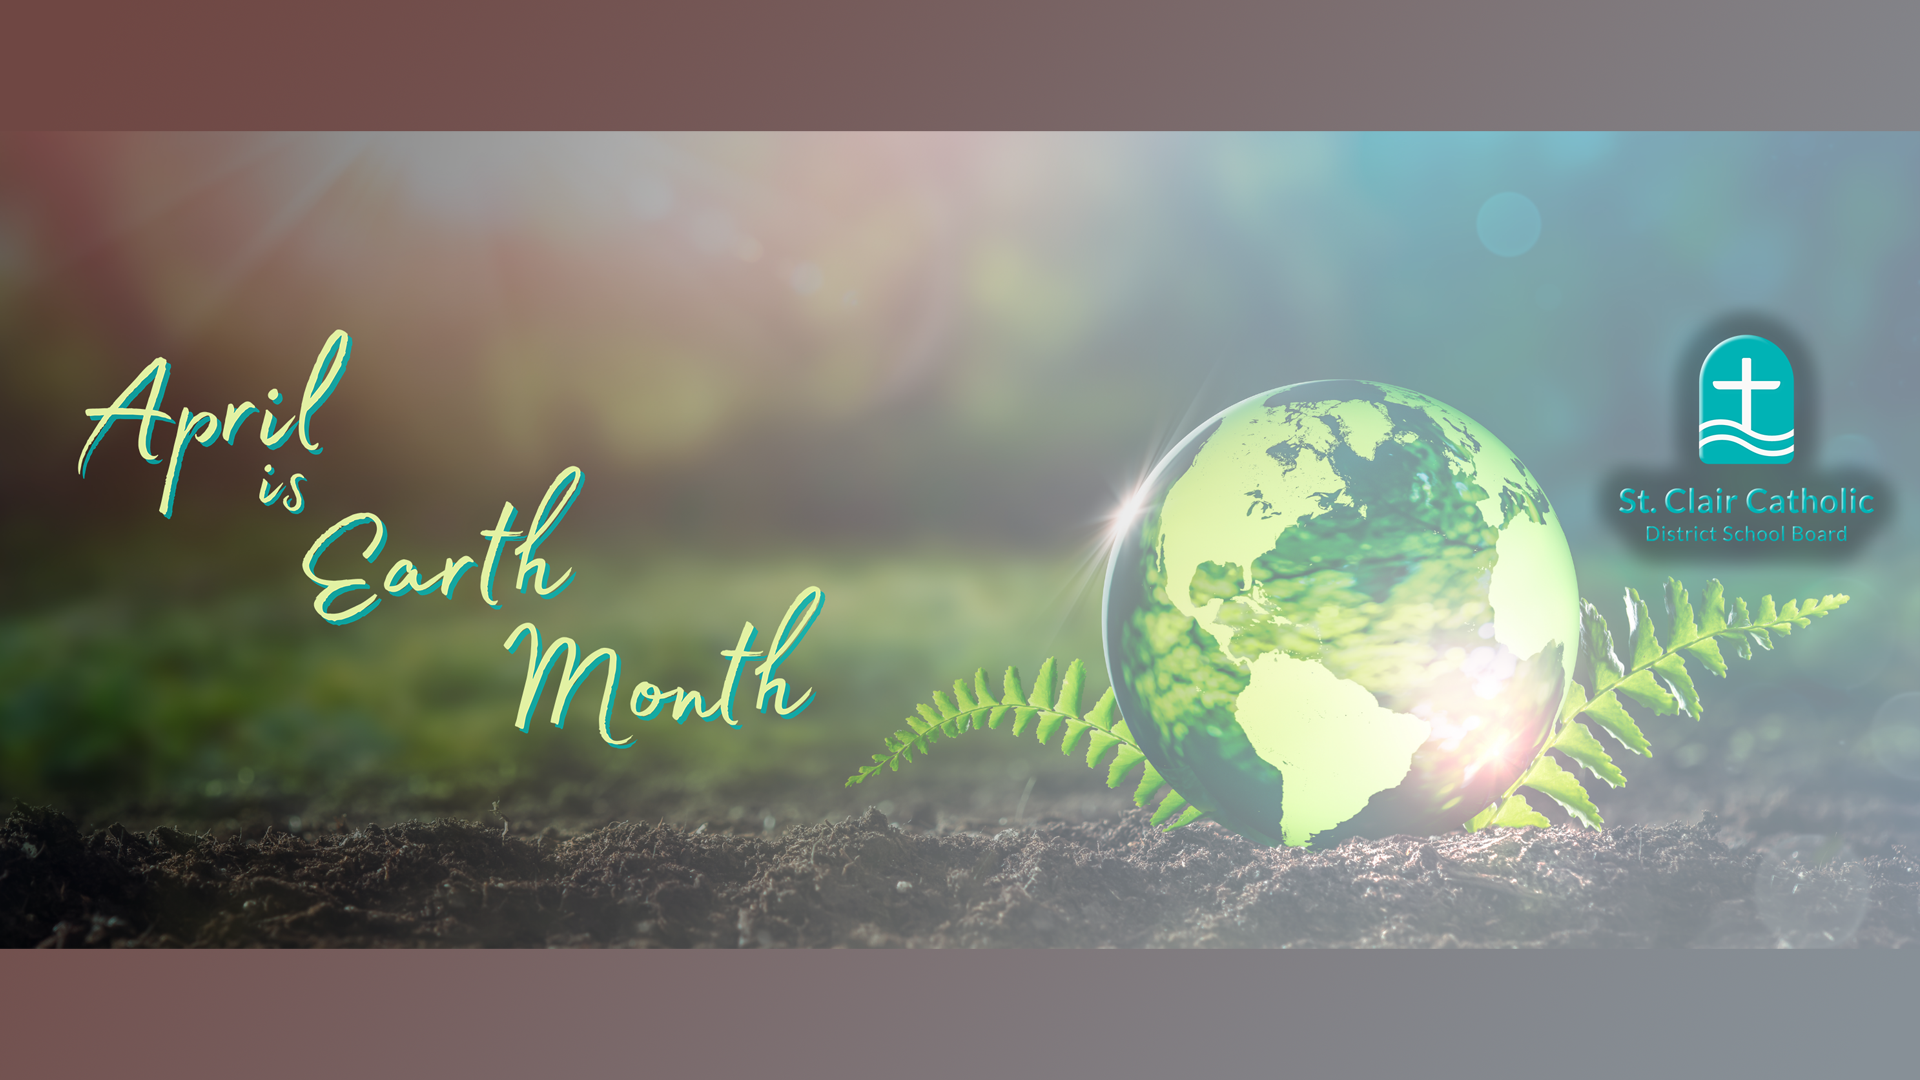 St. Clair Catholic Thanks You for Participating in Earth Month!